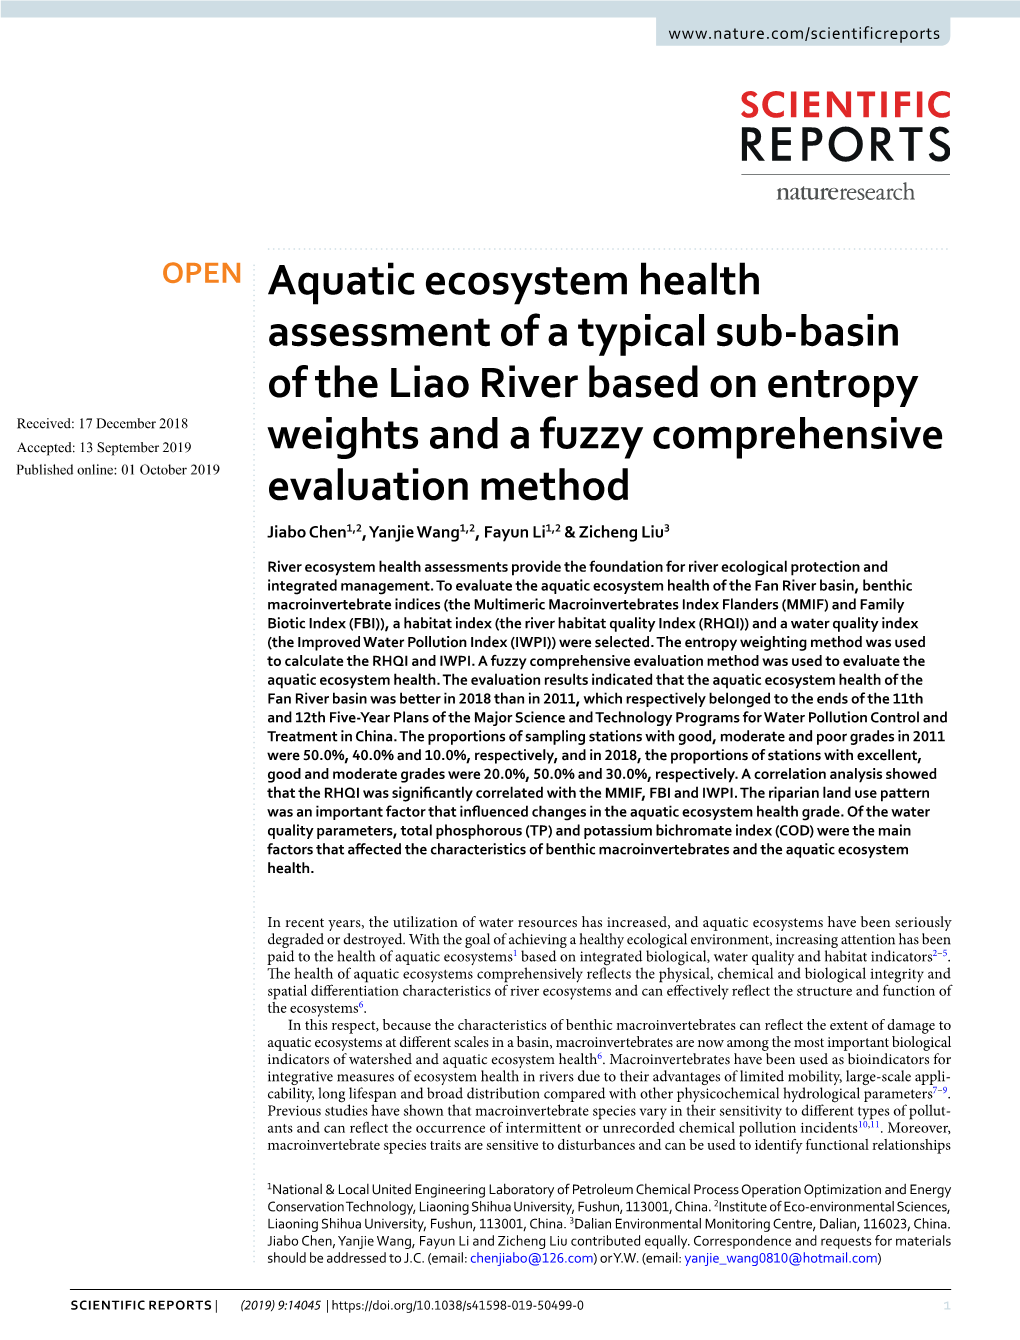 Aquatic Ecosystem Health Assessment of a Typical Sub-Basin of the Liao River Based on Entropy Weights and a Fuzzy Comprehensive